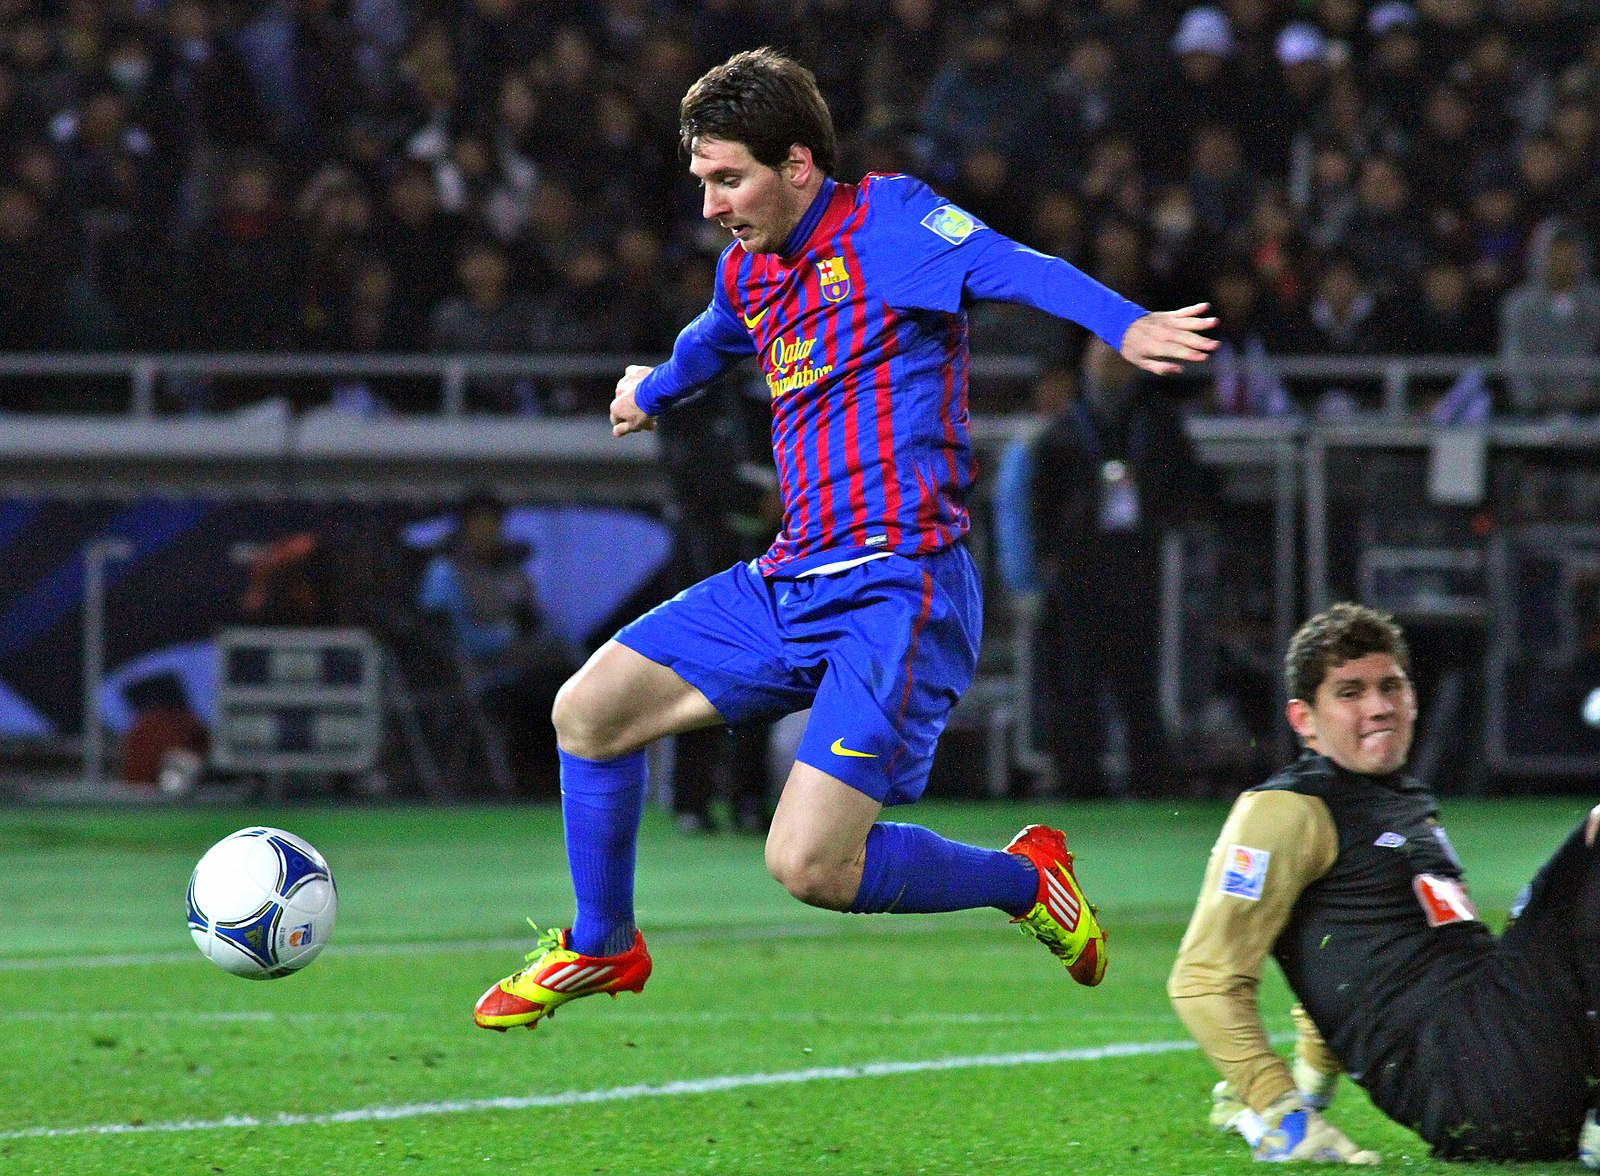 3 Lionel Messi records that won't be broken